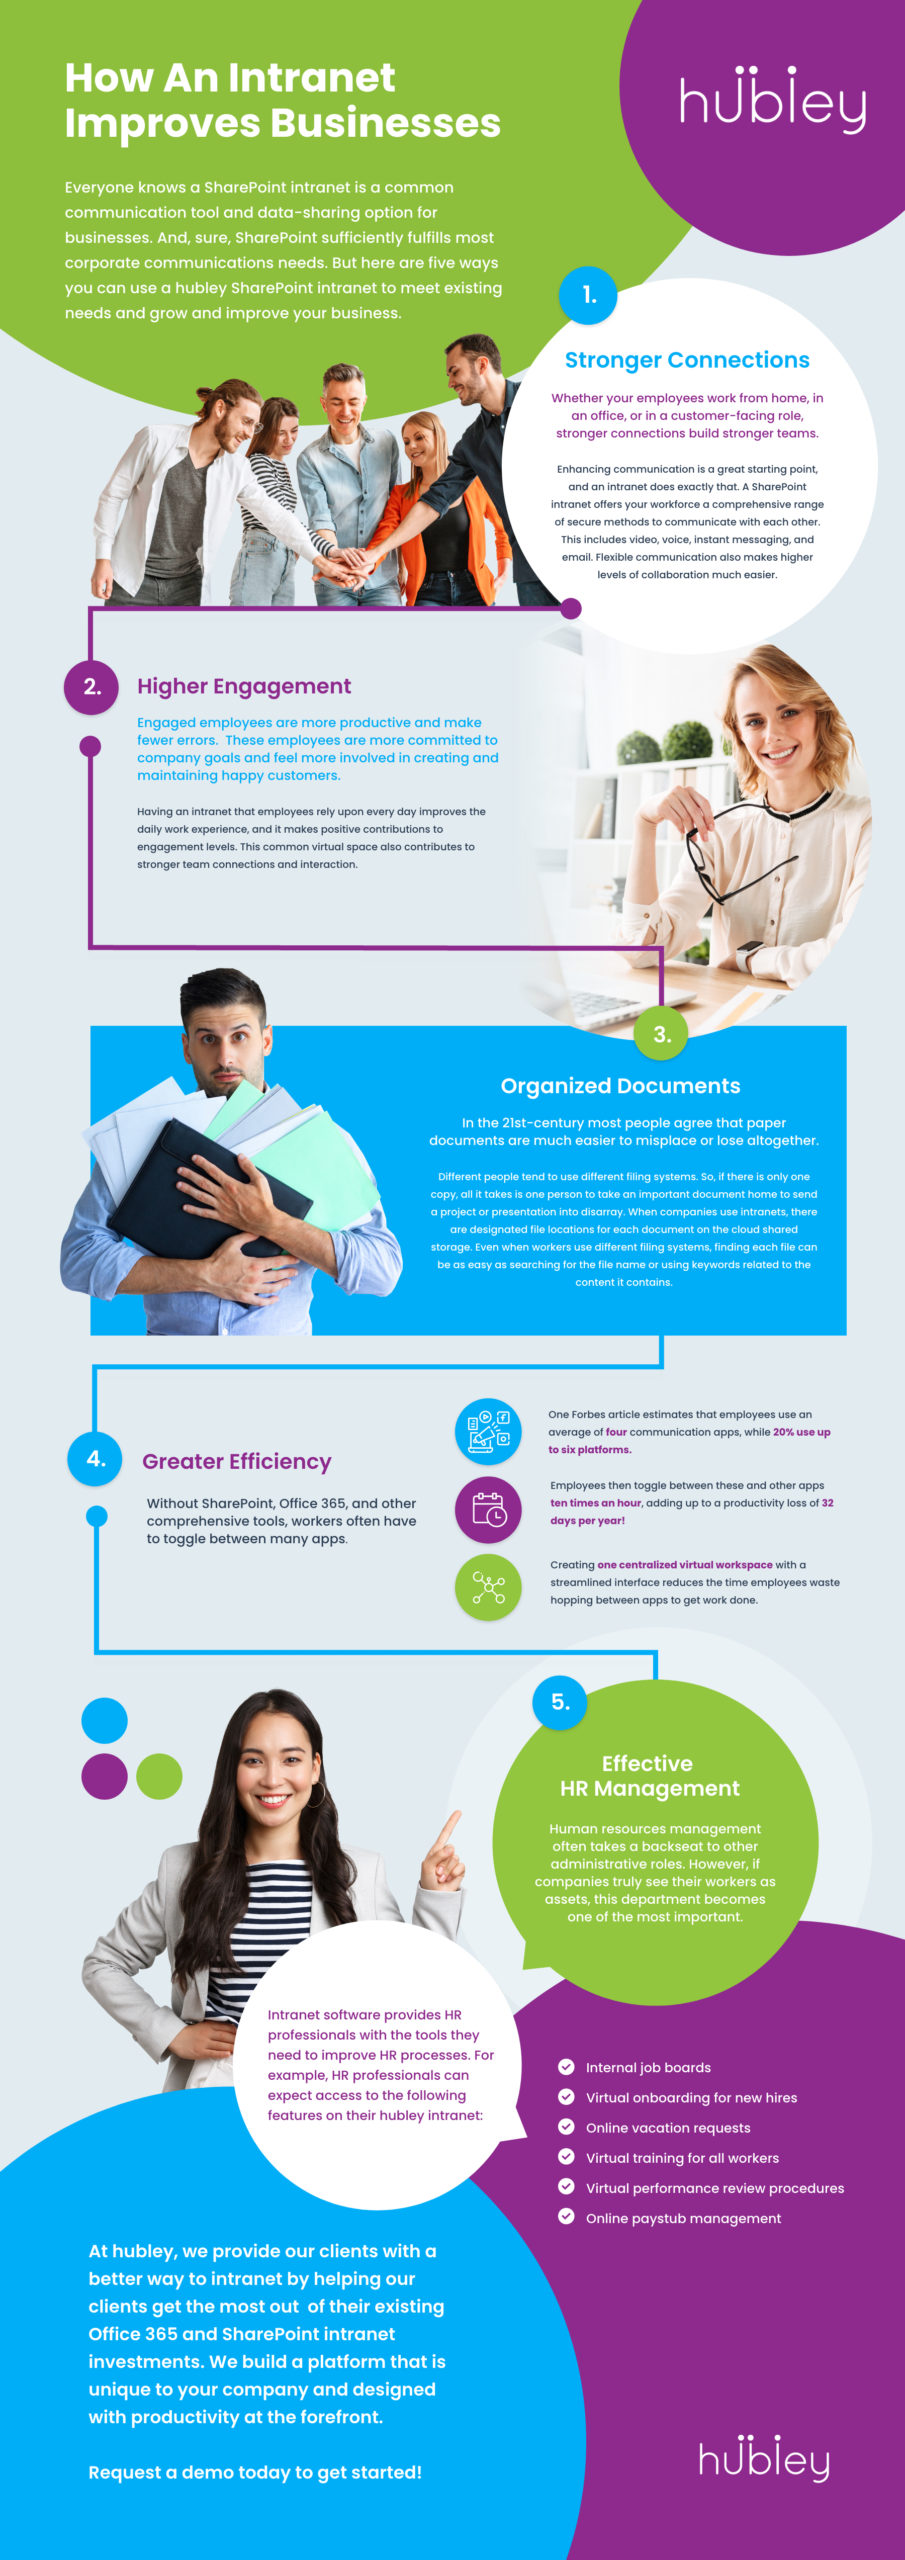 intranet infographic displaying how intranets improve businesses with stronger connections, higher engagement, organized documents, greater efficiency, and effective HR management.